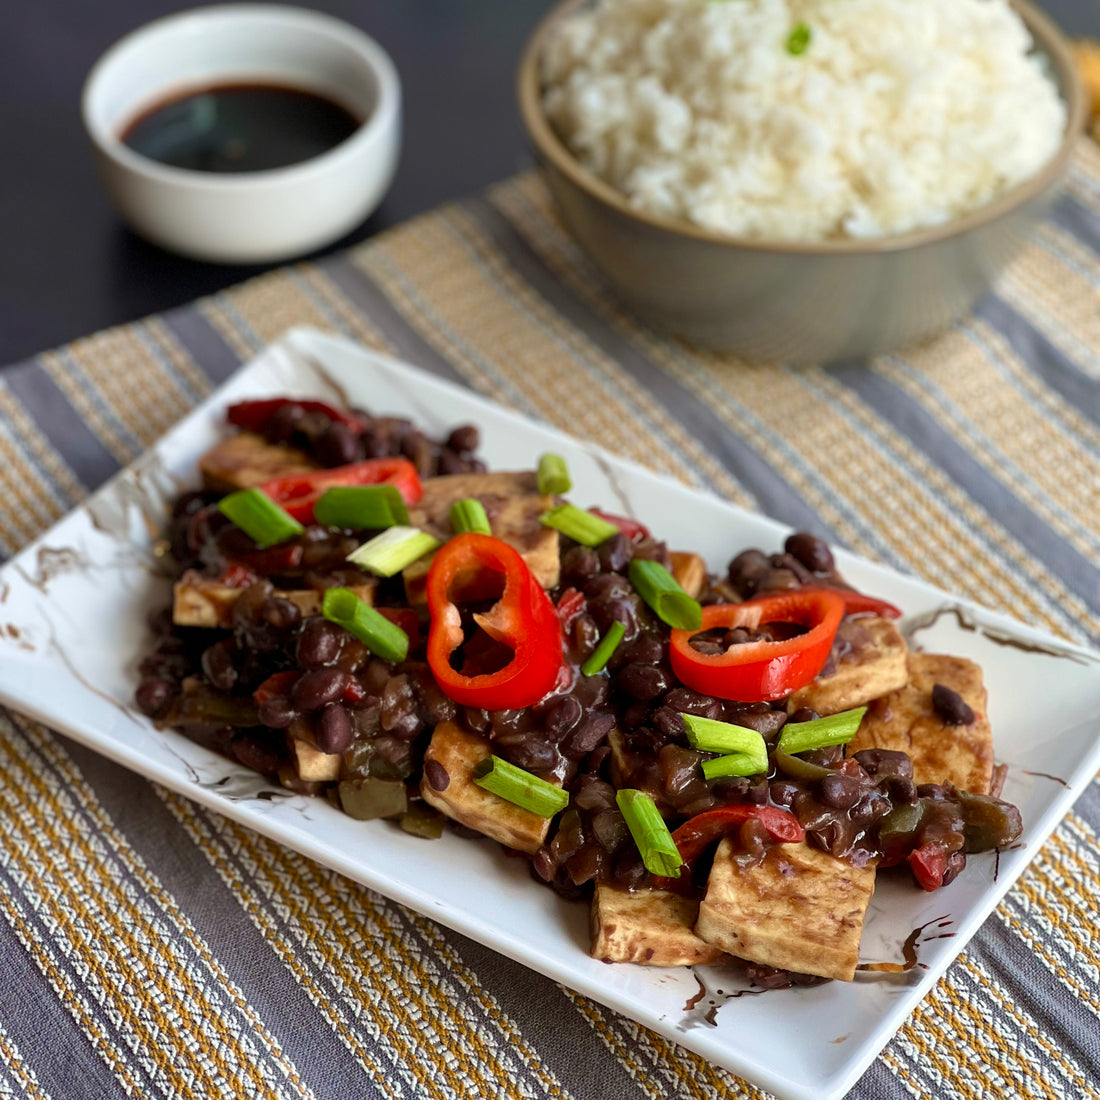 Tofu in Black Bean Sauce; Simple stir-fried Asian inspired dish with minimal ingrediencies full of earthy, fresh flavors. Protein and calcium loaded tofu in a divine sweet and savory black bean sauce, served over a bowl of hot rice.